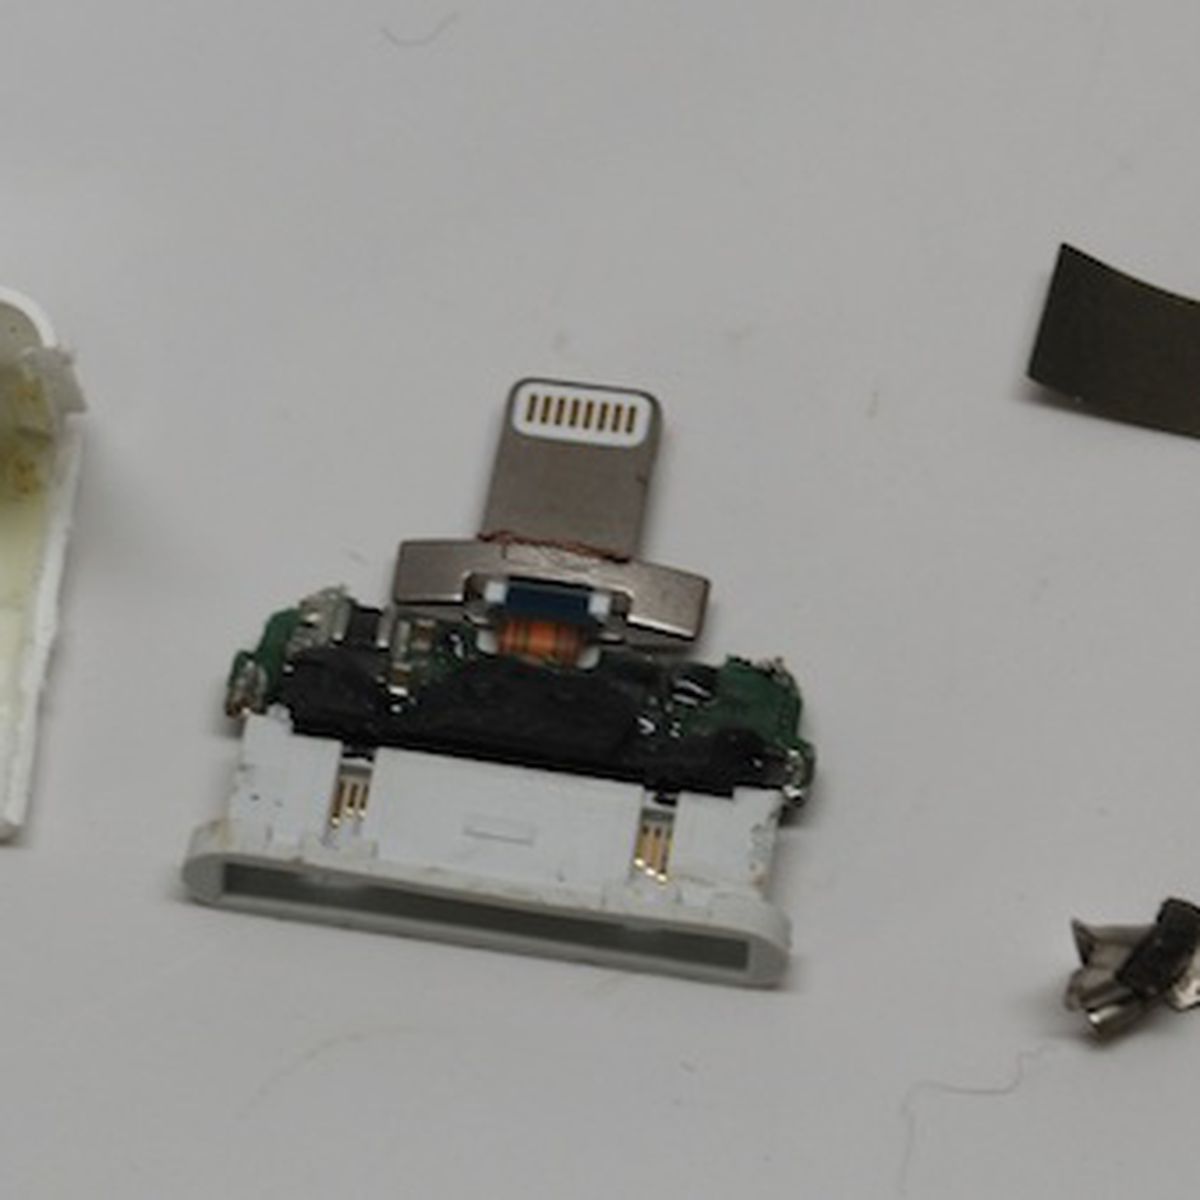 Apple's to 30-Pin Torn Apart, Reveals and Copious Glue - MacRumors